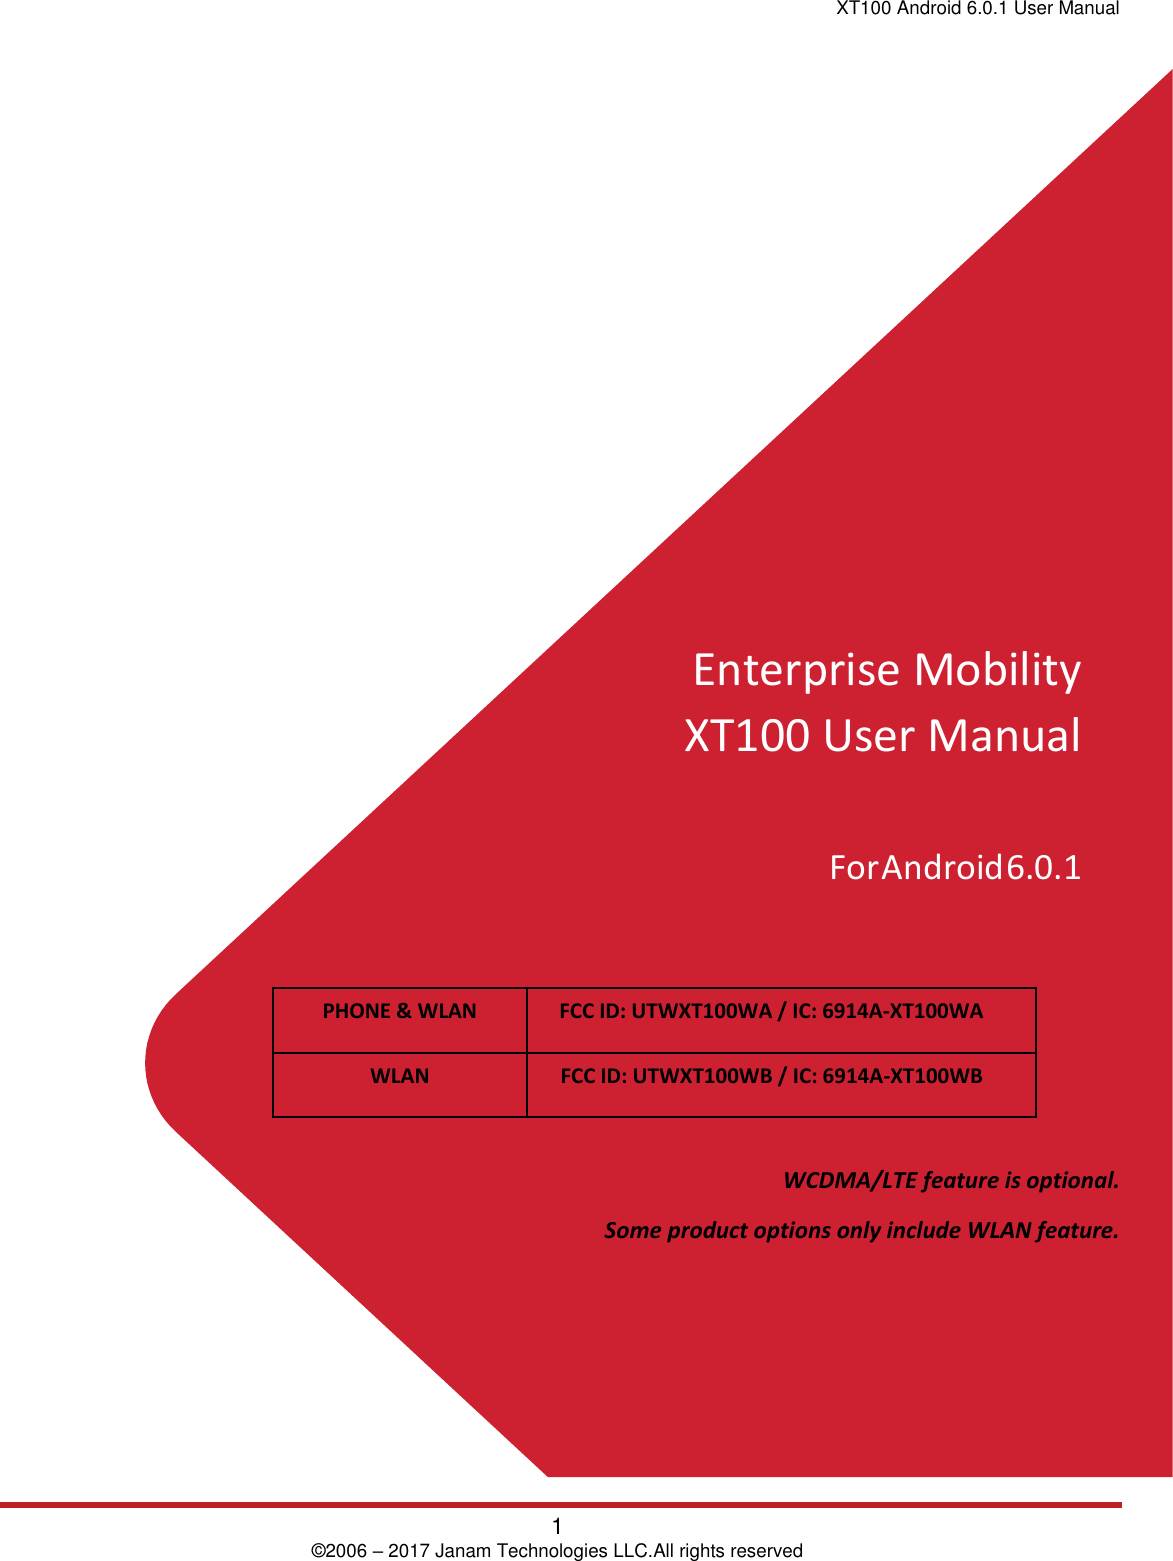 XT100 Android 6.0.1 User Manual 1 © 2006 – 2017 Janam Technologies LLC.All rights reserved Enterprise Mobility XT100 User Manual For Android 6.0.1 PHONE &amp; WLAN FCC ID: UTWXT100WA / IC: 6914A-XT100WA WLAN FCC ID: UTWXT100WB / IC: 6914A-XT100WBWCDMA/LTE feature is optional.  Some product options only include WLAN feature. 